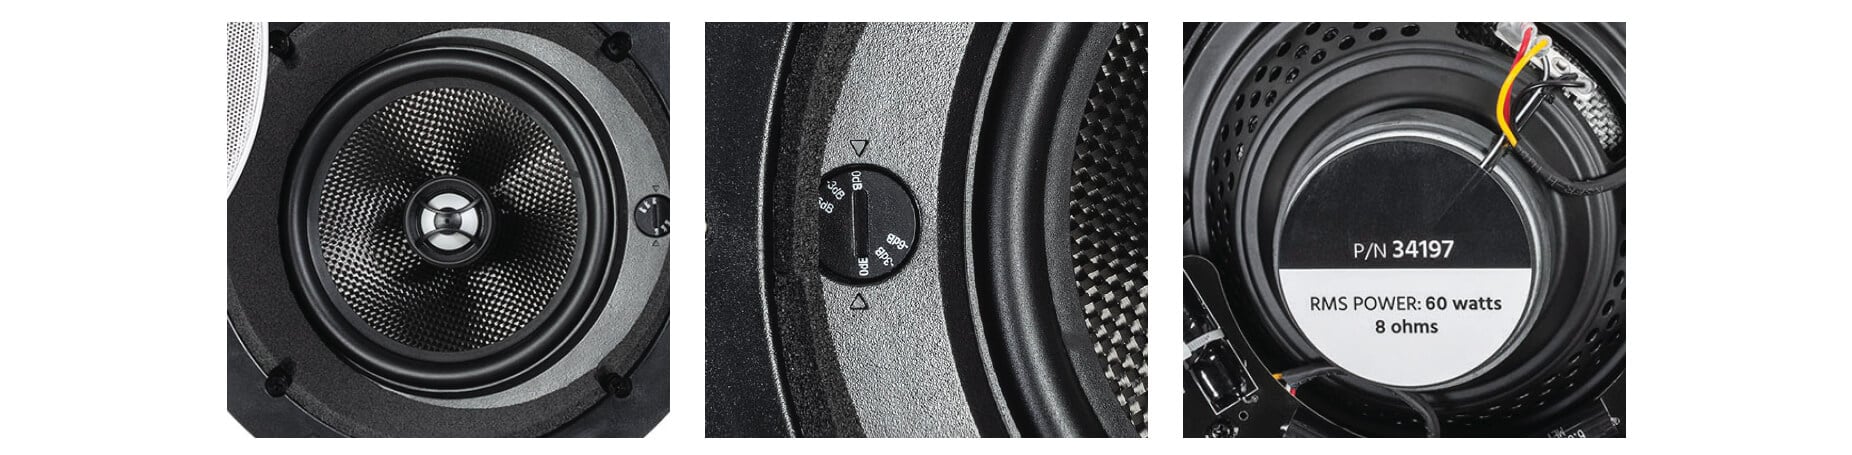 Monoprice Alpha In Ceiling Speakers 6 5in Carbon Fiber 2 Way With 15 Angled Drivers Pair Monoprice Com